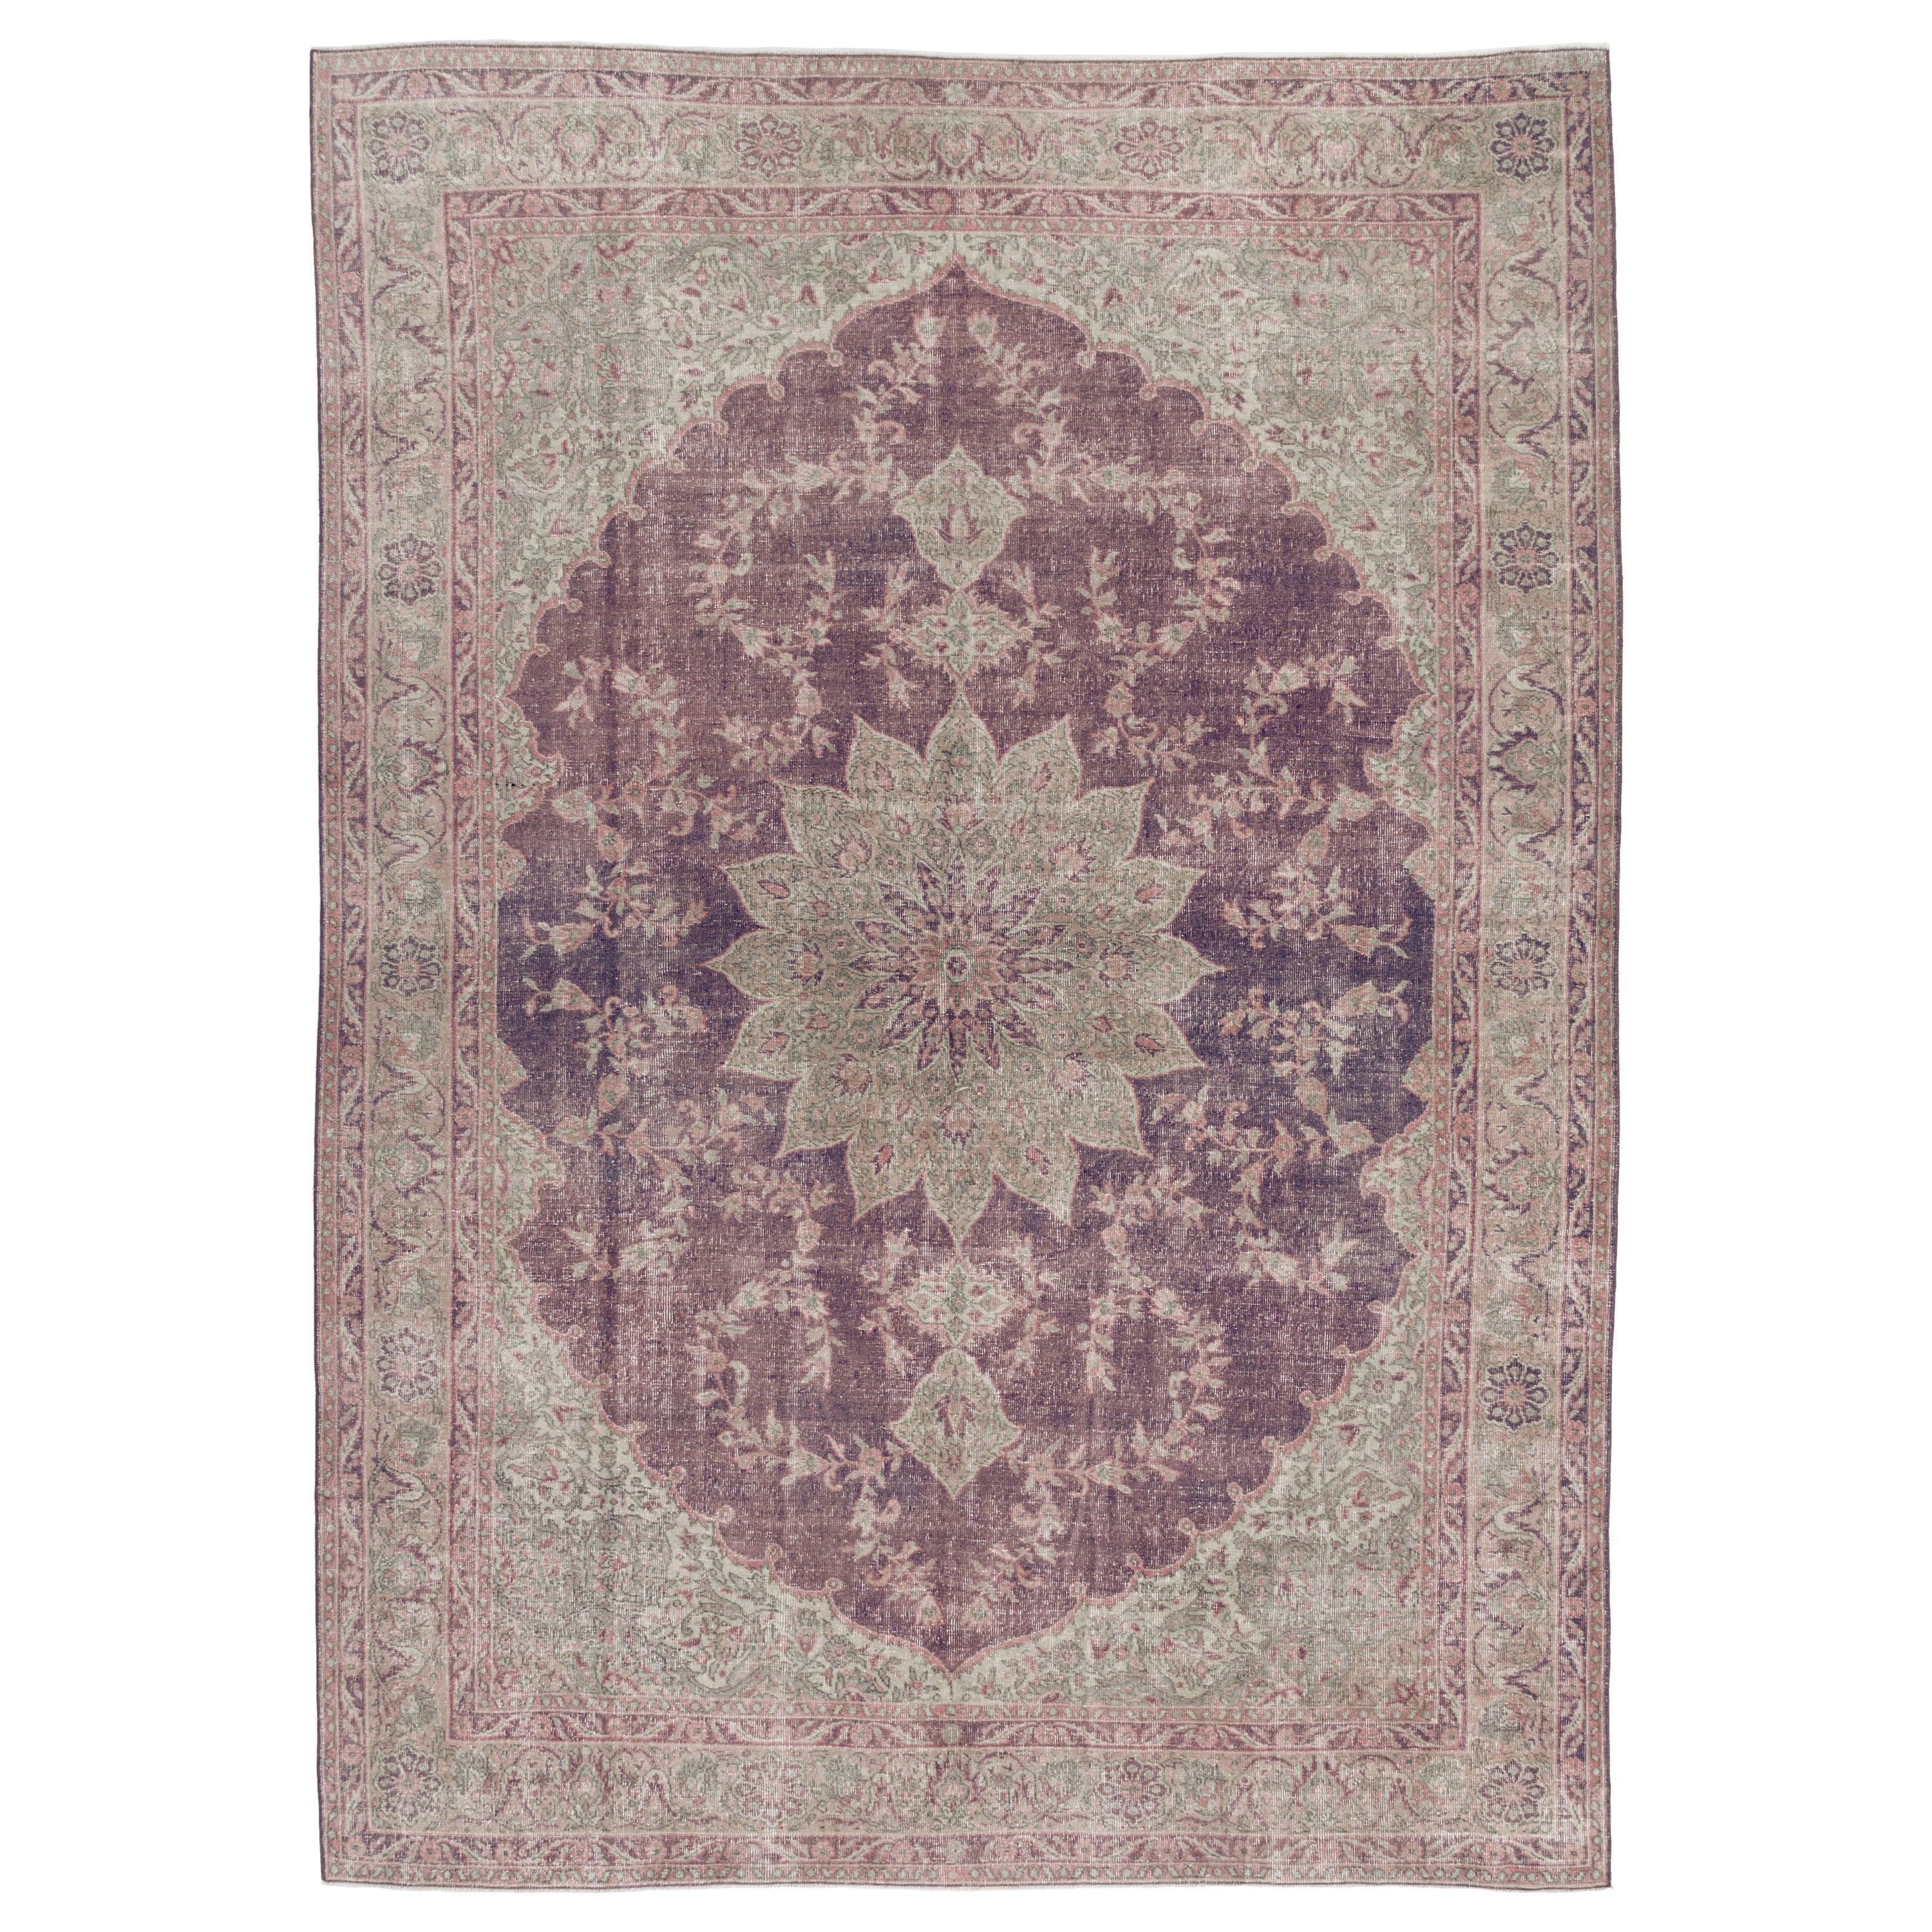 8x11.2 Ft Vintage Handmade Turkish Area Rug with Medallion Design in Soft Colors For Sale